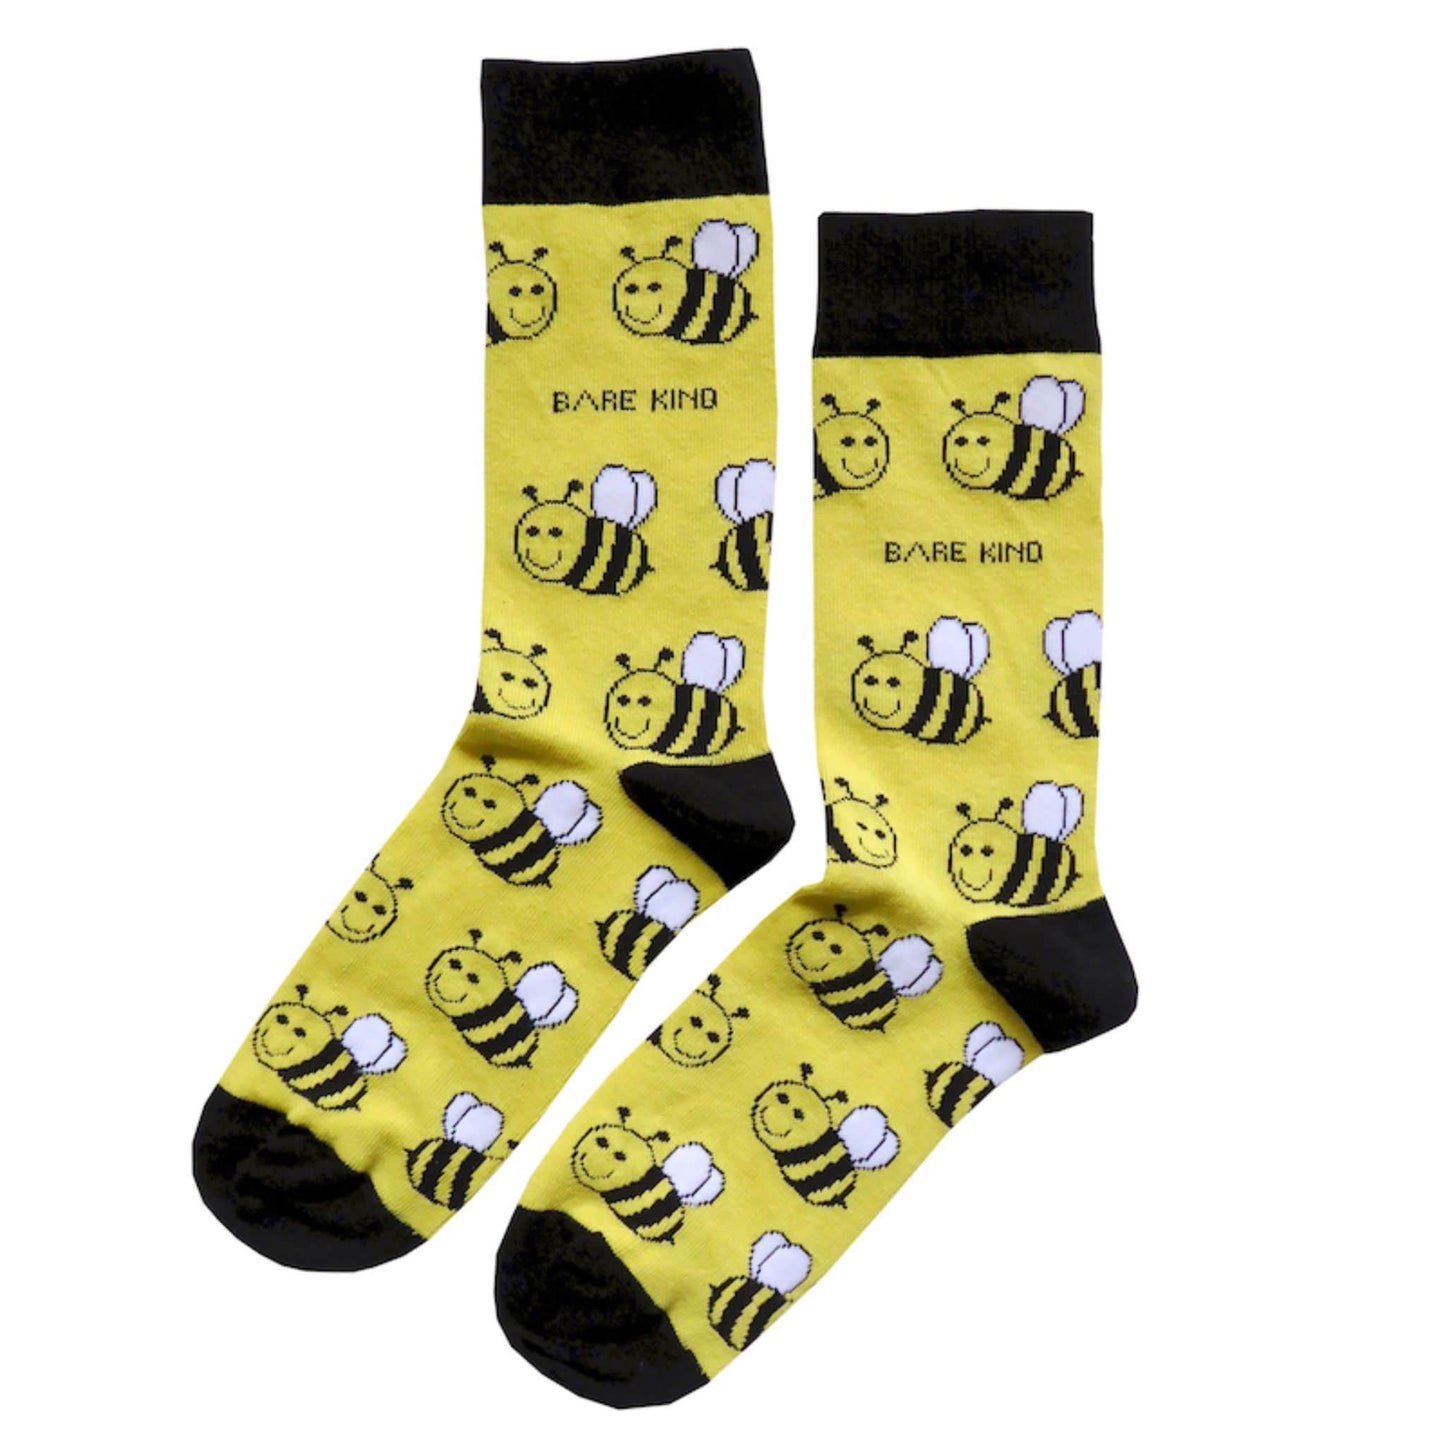 Wildlife Lover's Gift Set - Save the bees socks from Bare Kind